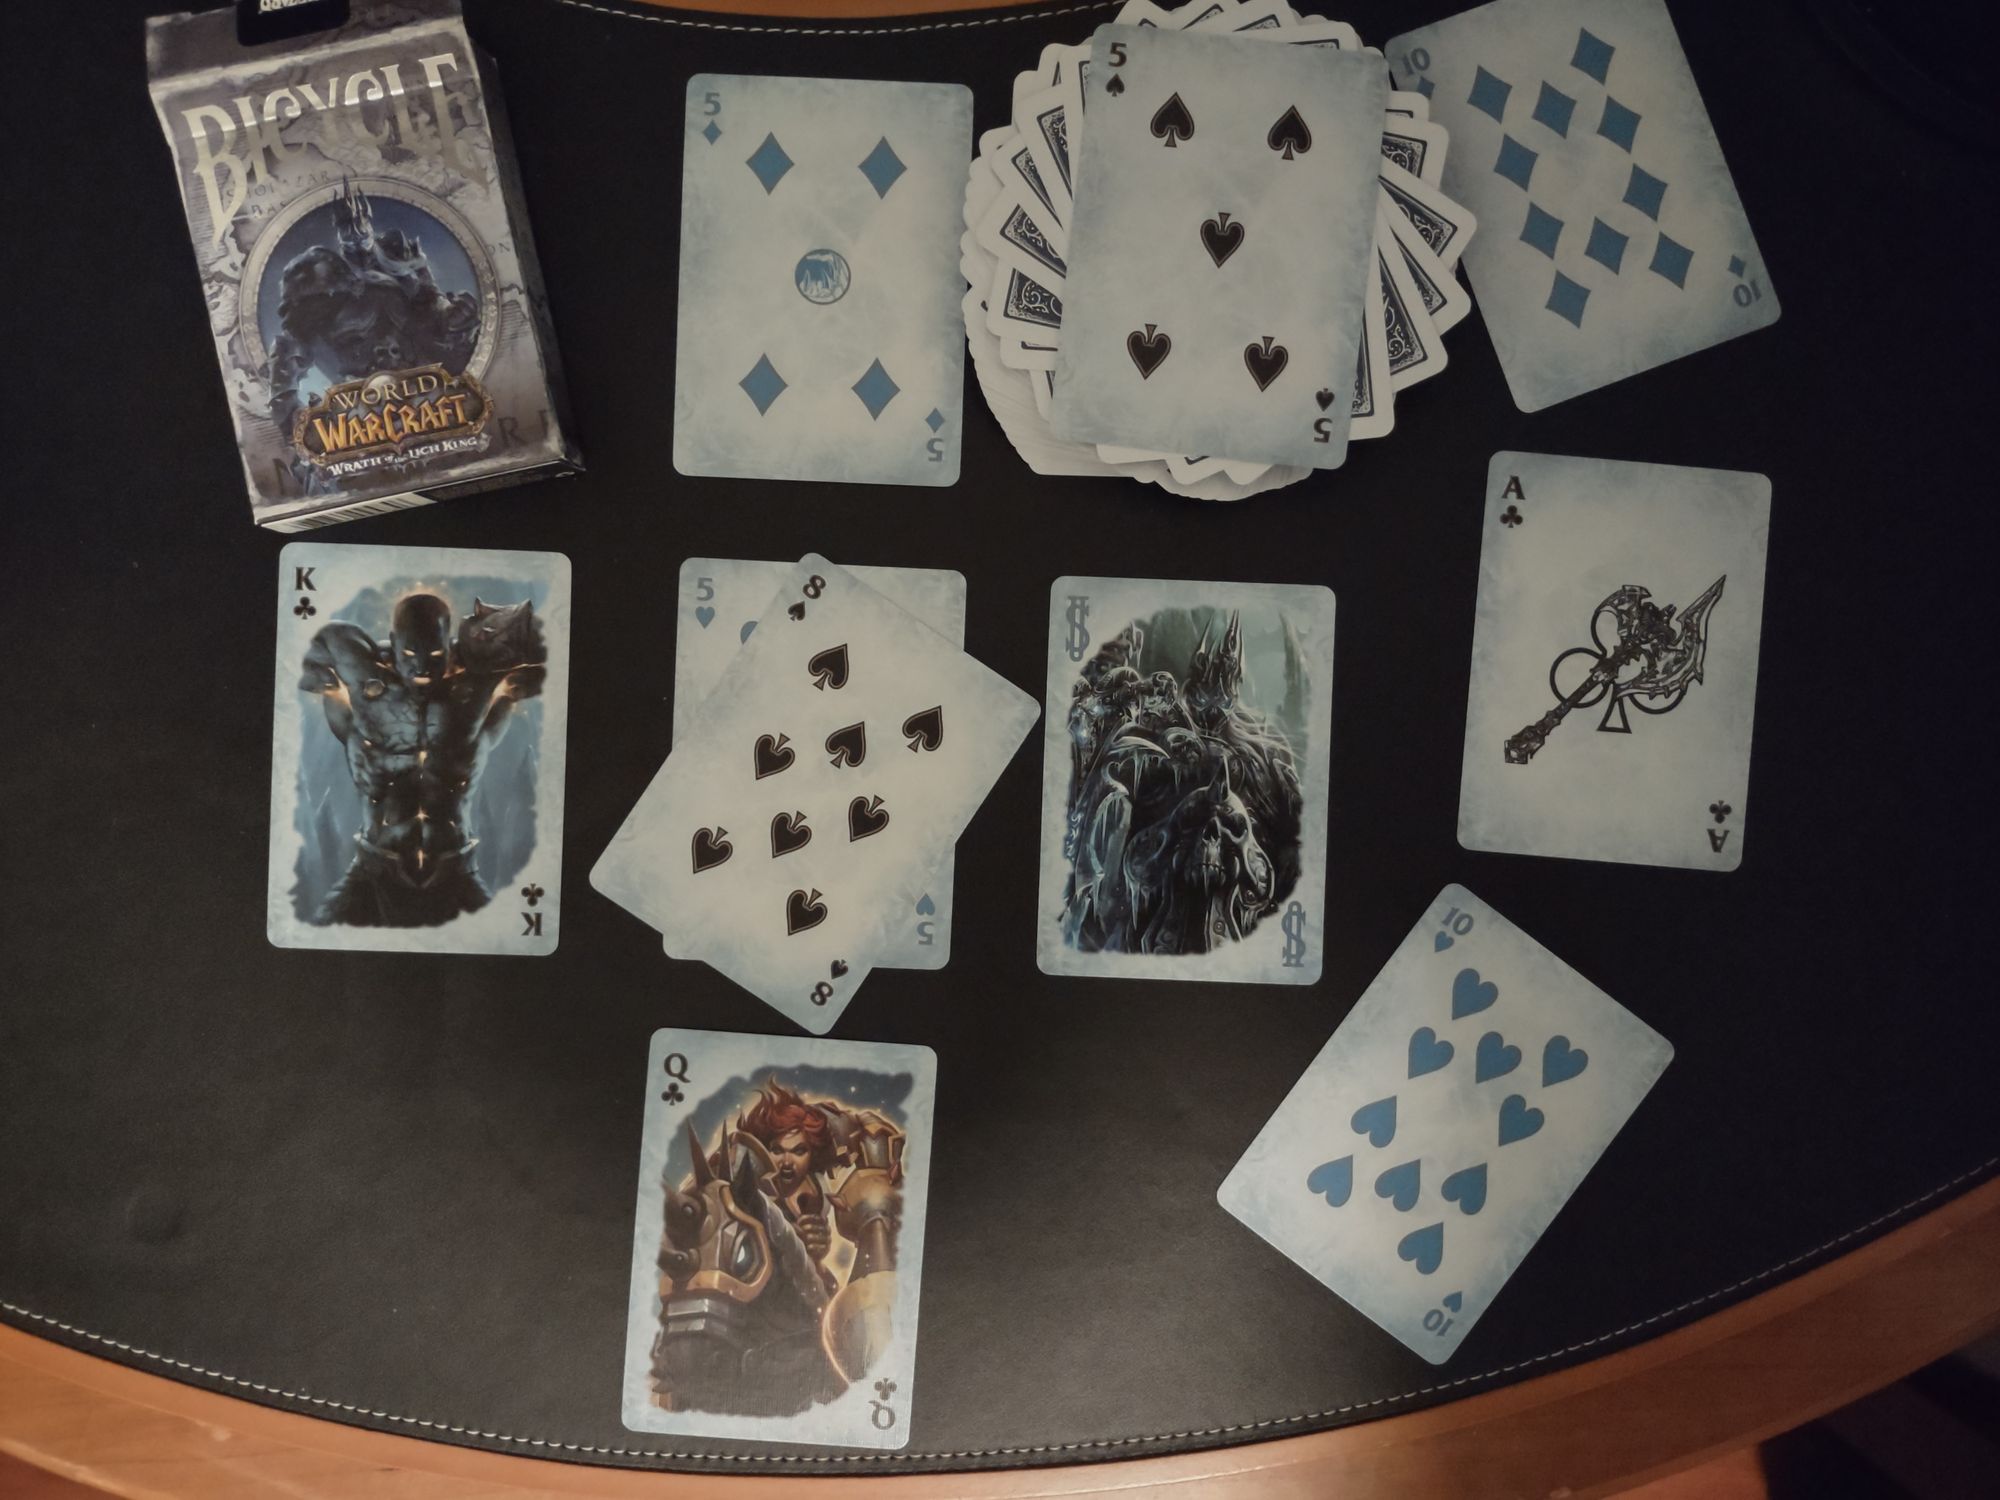 From the World of Warcraft: Wrath of the Lich King deck by Bicycle.